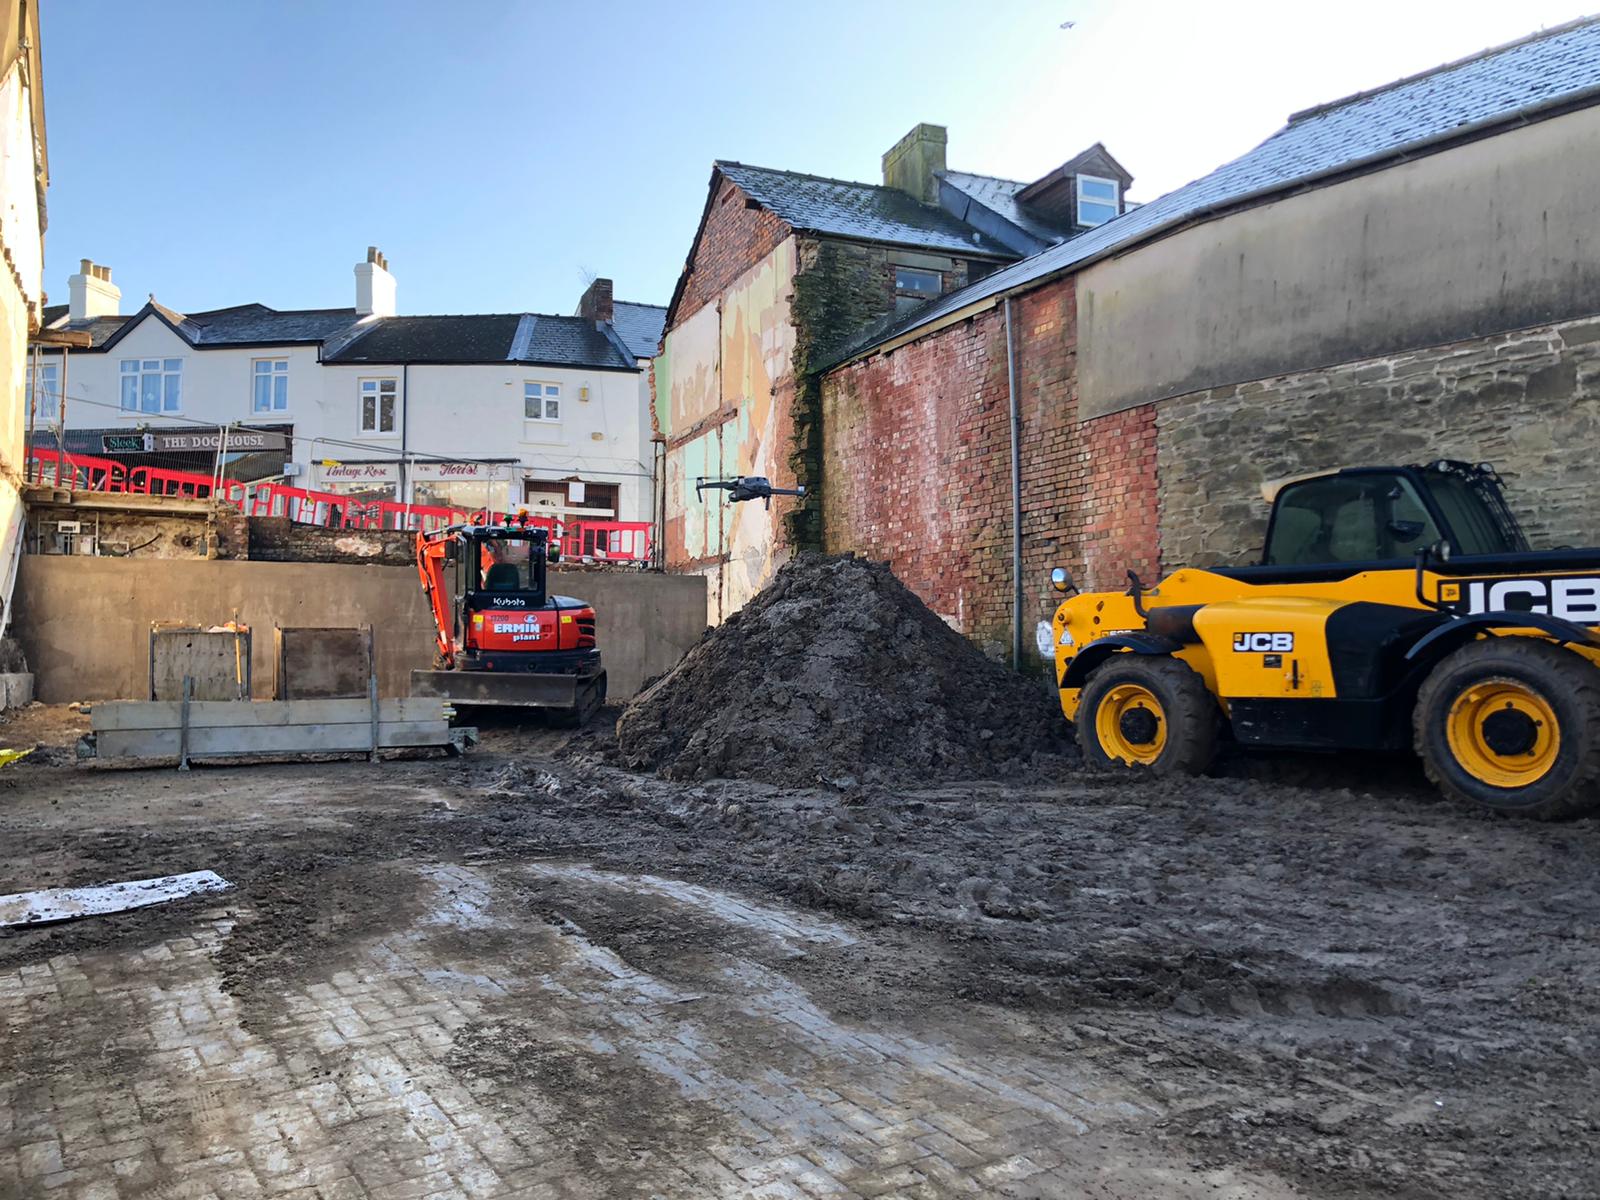 Project site at Cinderford for a residential and commercial development